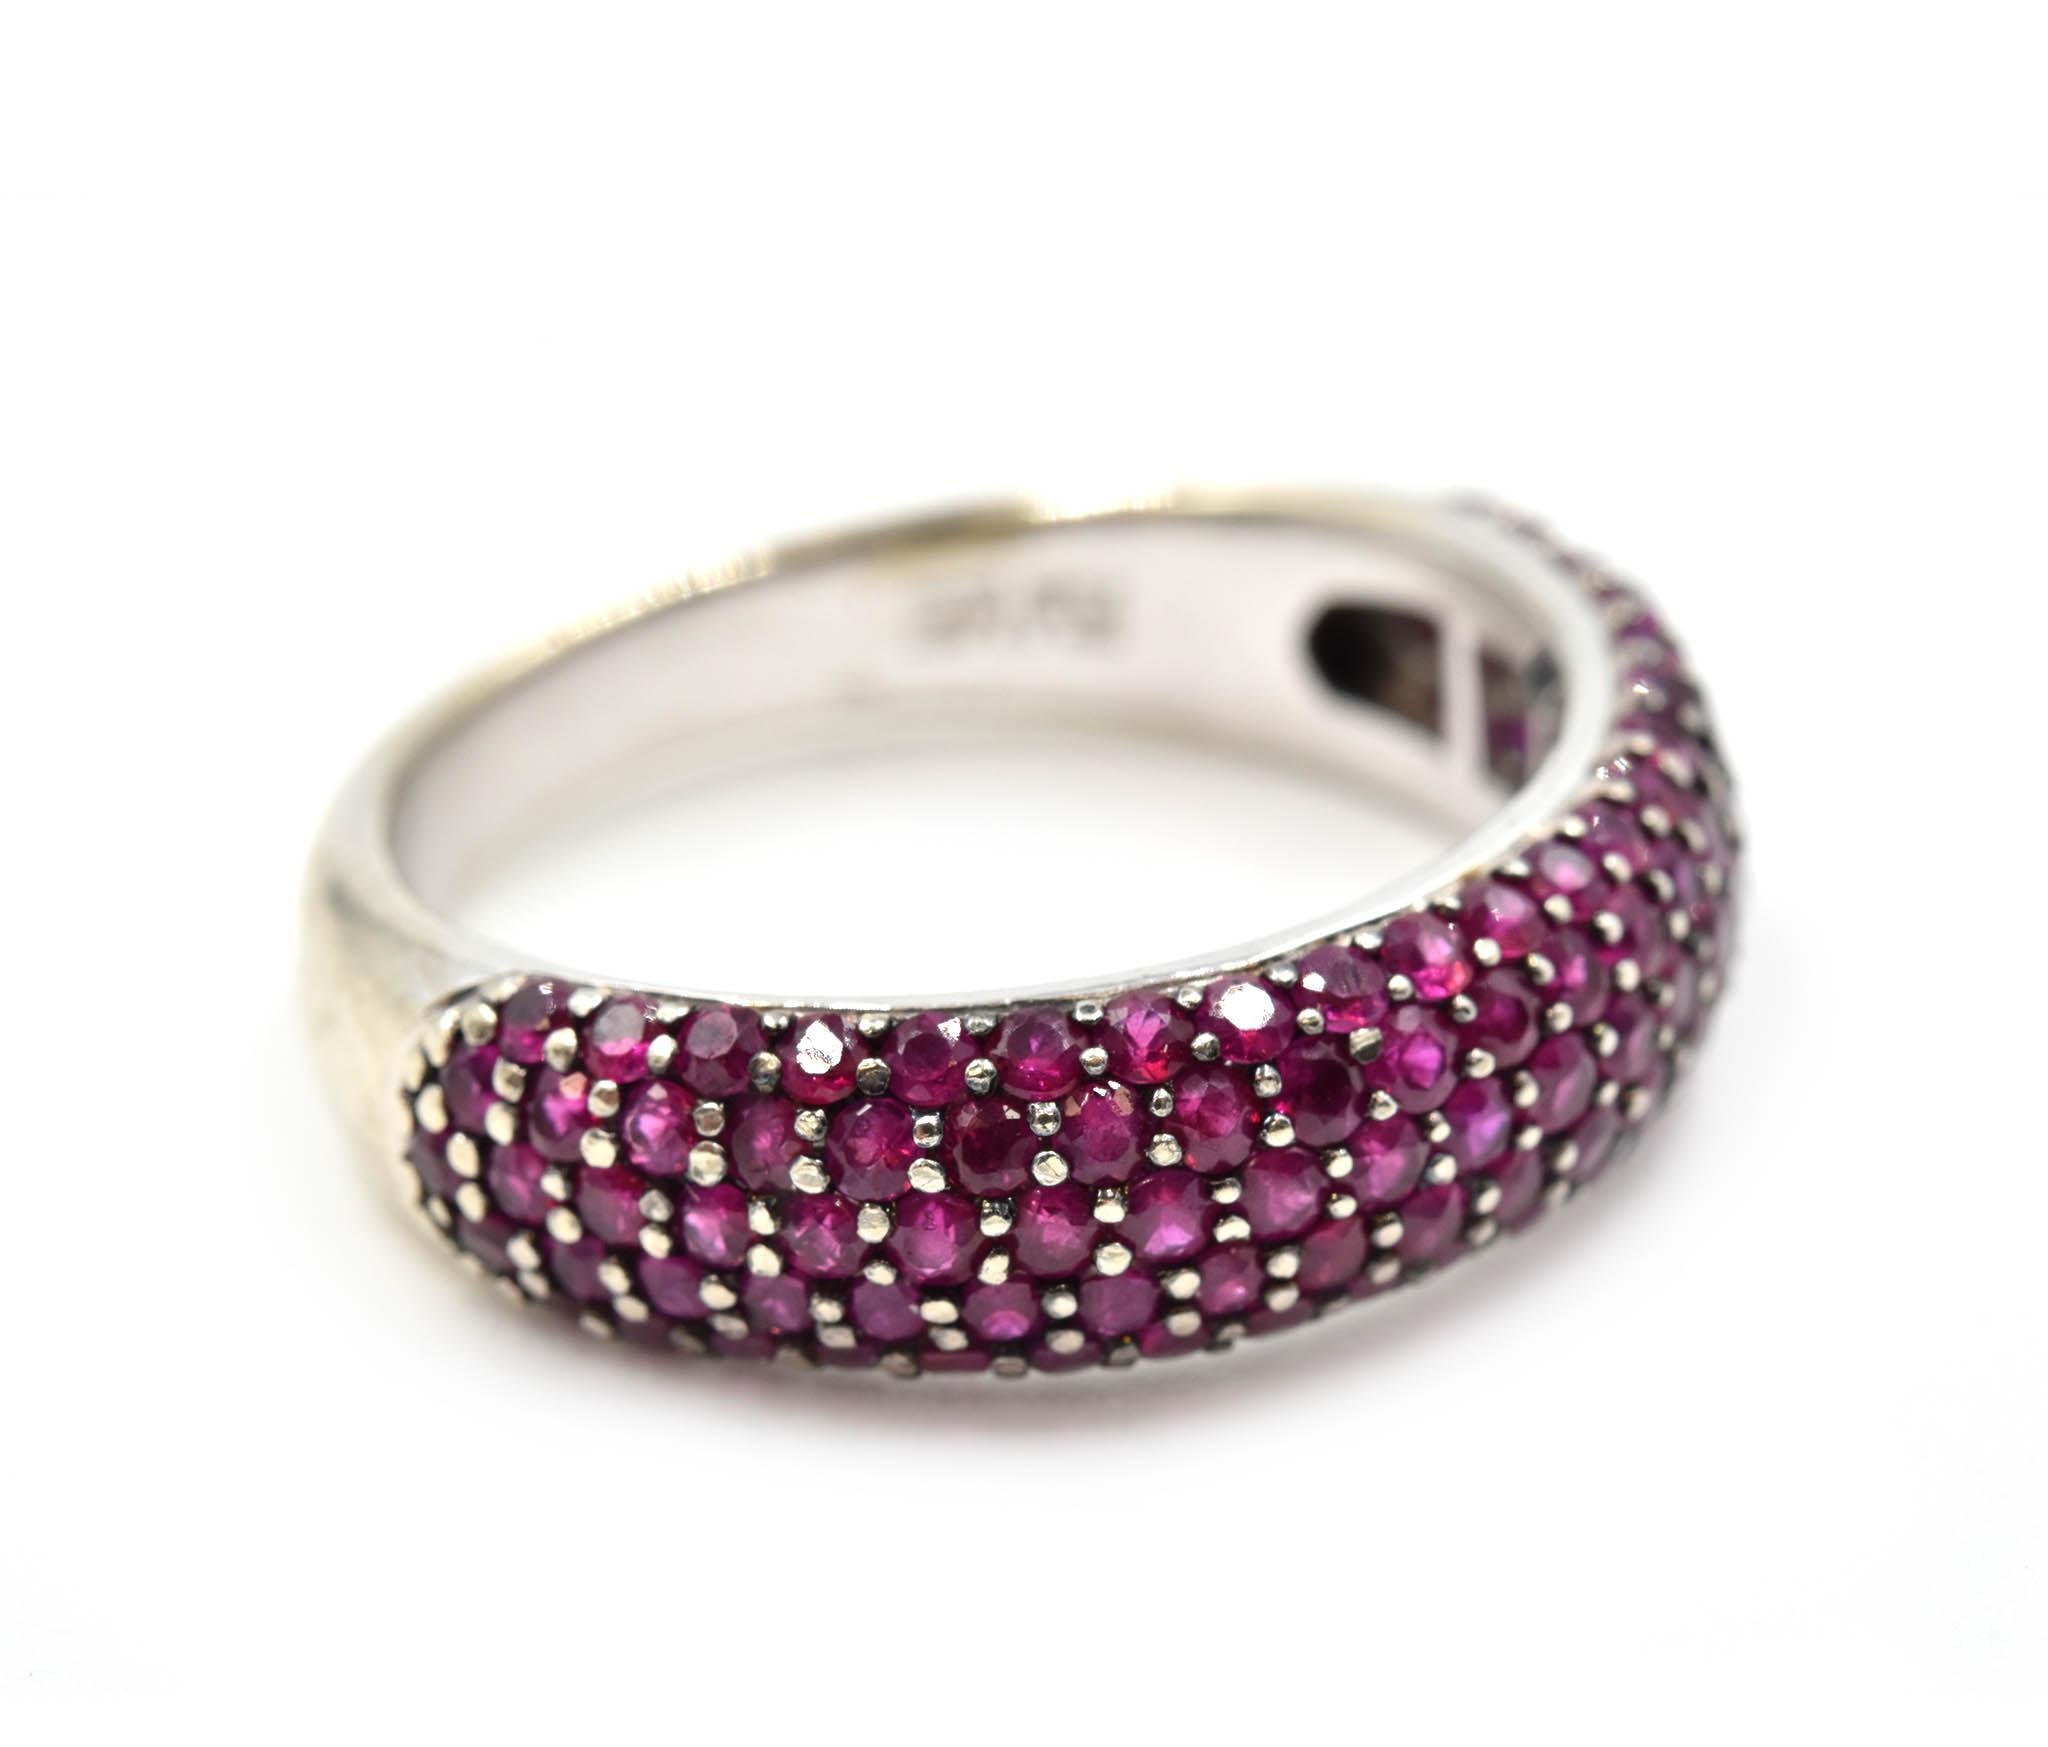 Designer: Effy
Gemstones: 108 rubies, 1.50 total carat weight
Material: 14k white gold
Dimensions: top of the ring is 6mm in length
Ring size: 7
Weight: 4.5 grams
Retail: $3,500
